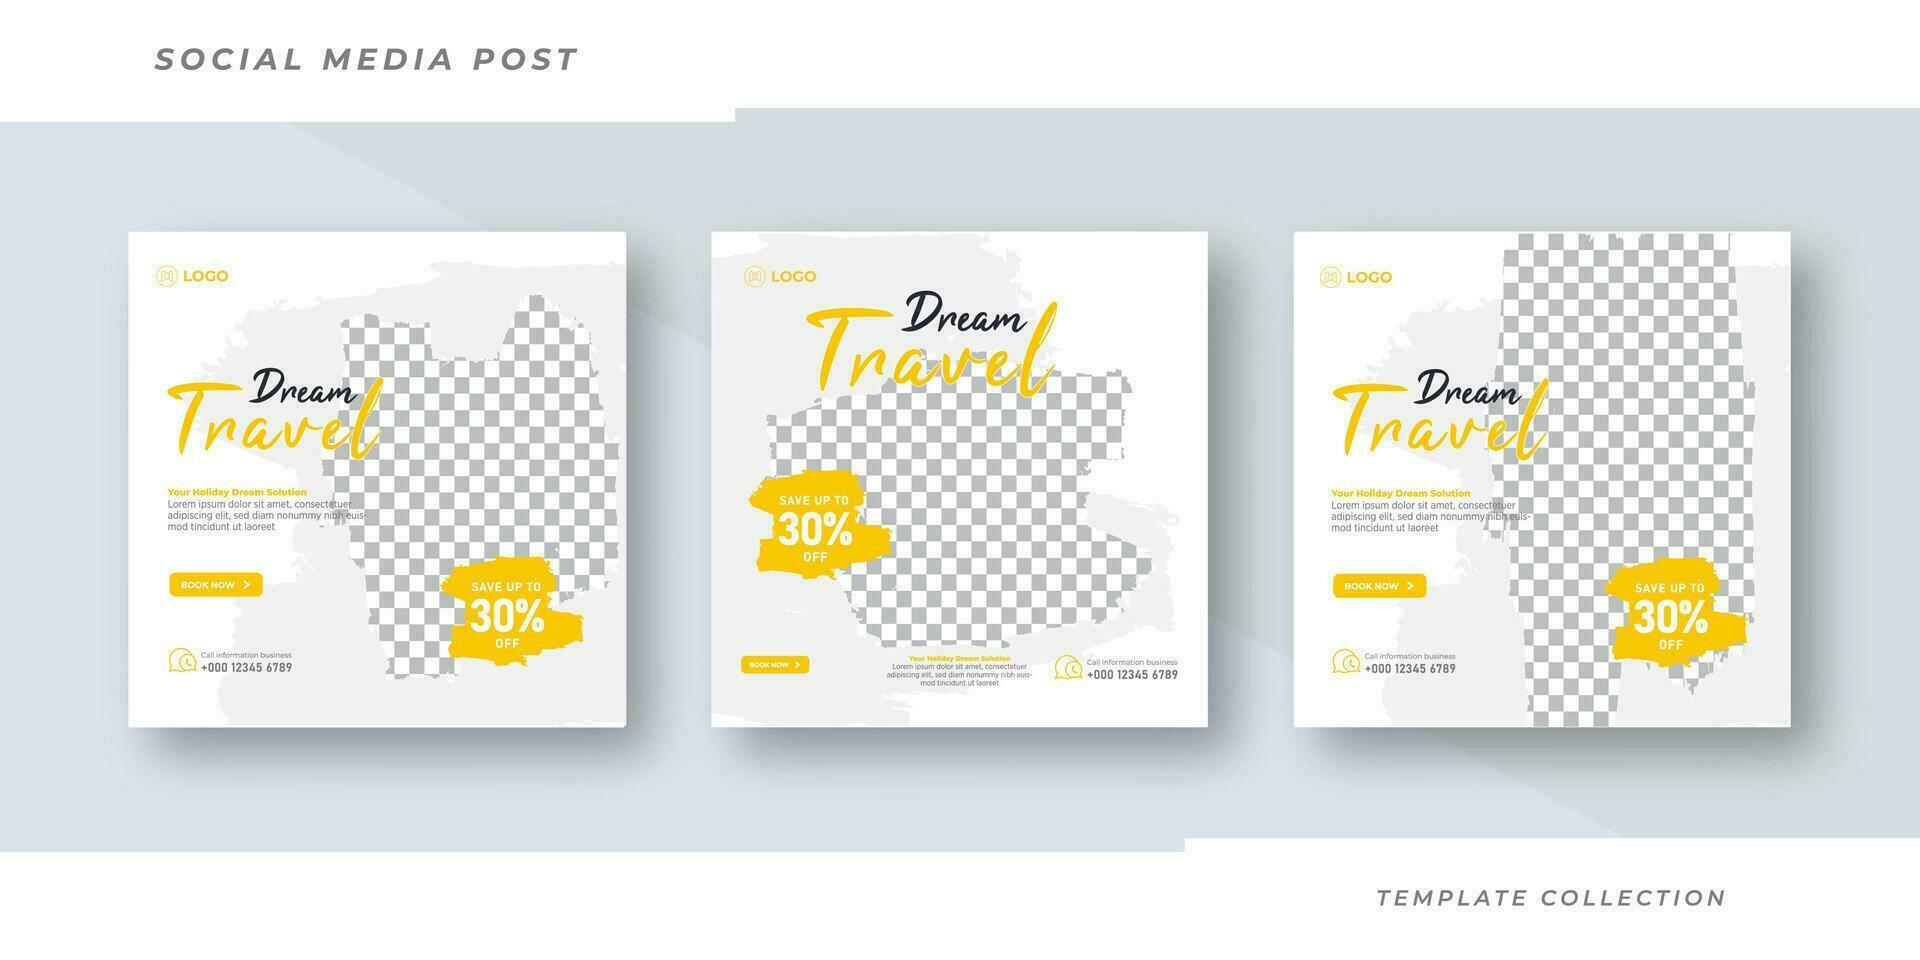 Dream Travel flyer or poster for traveling agency business offer promotion. Holiday and tour advertisement banner design. Pro Vector